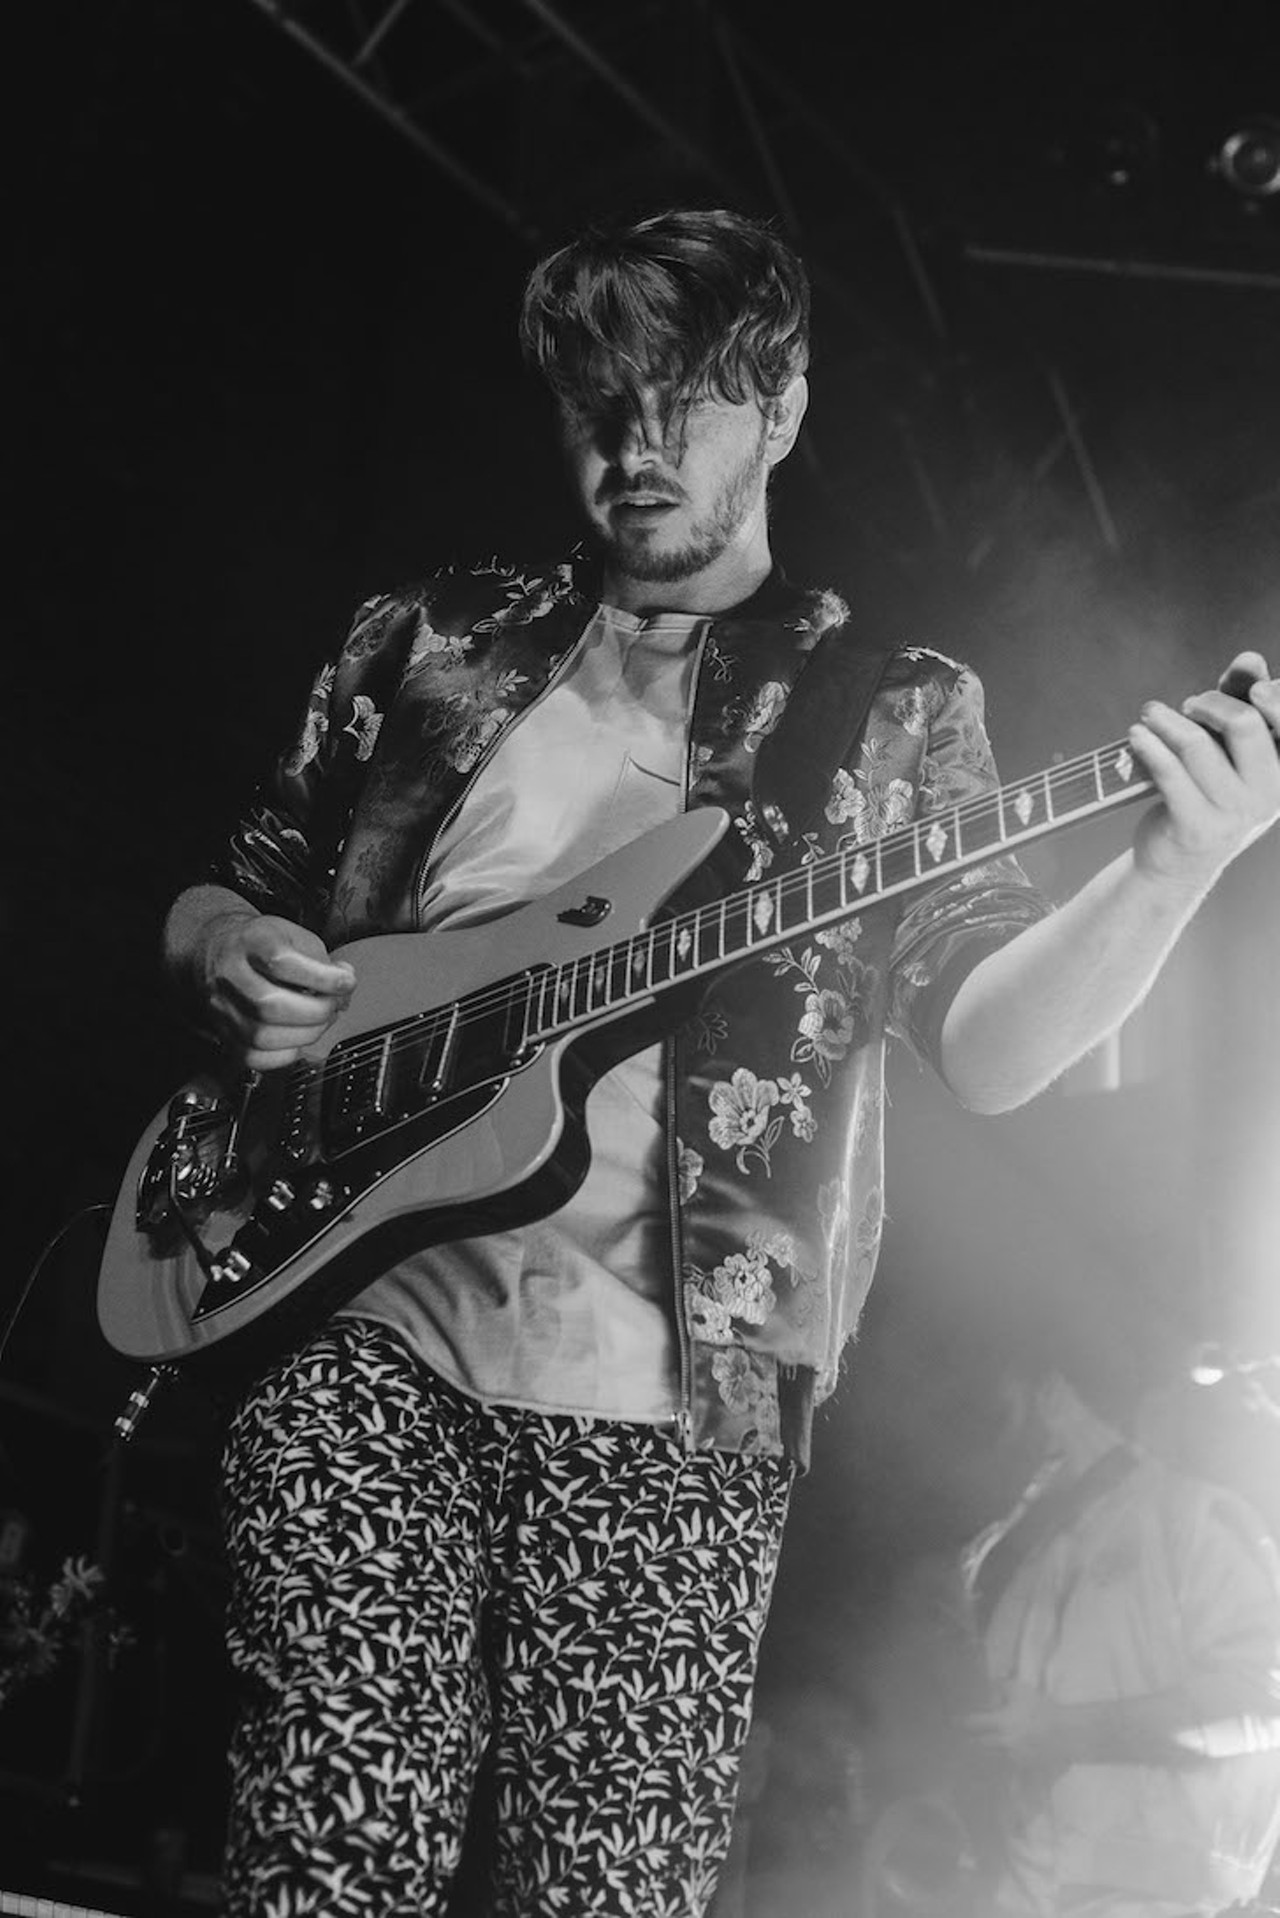 Photos from Misterwives and Smallpools at the Beacham